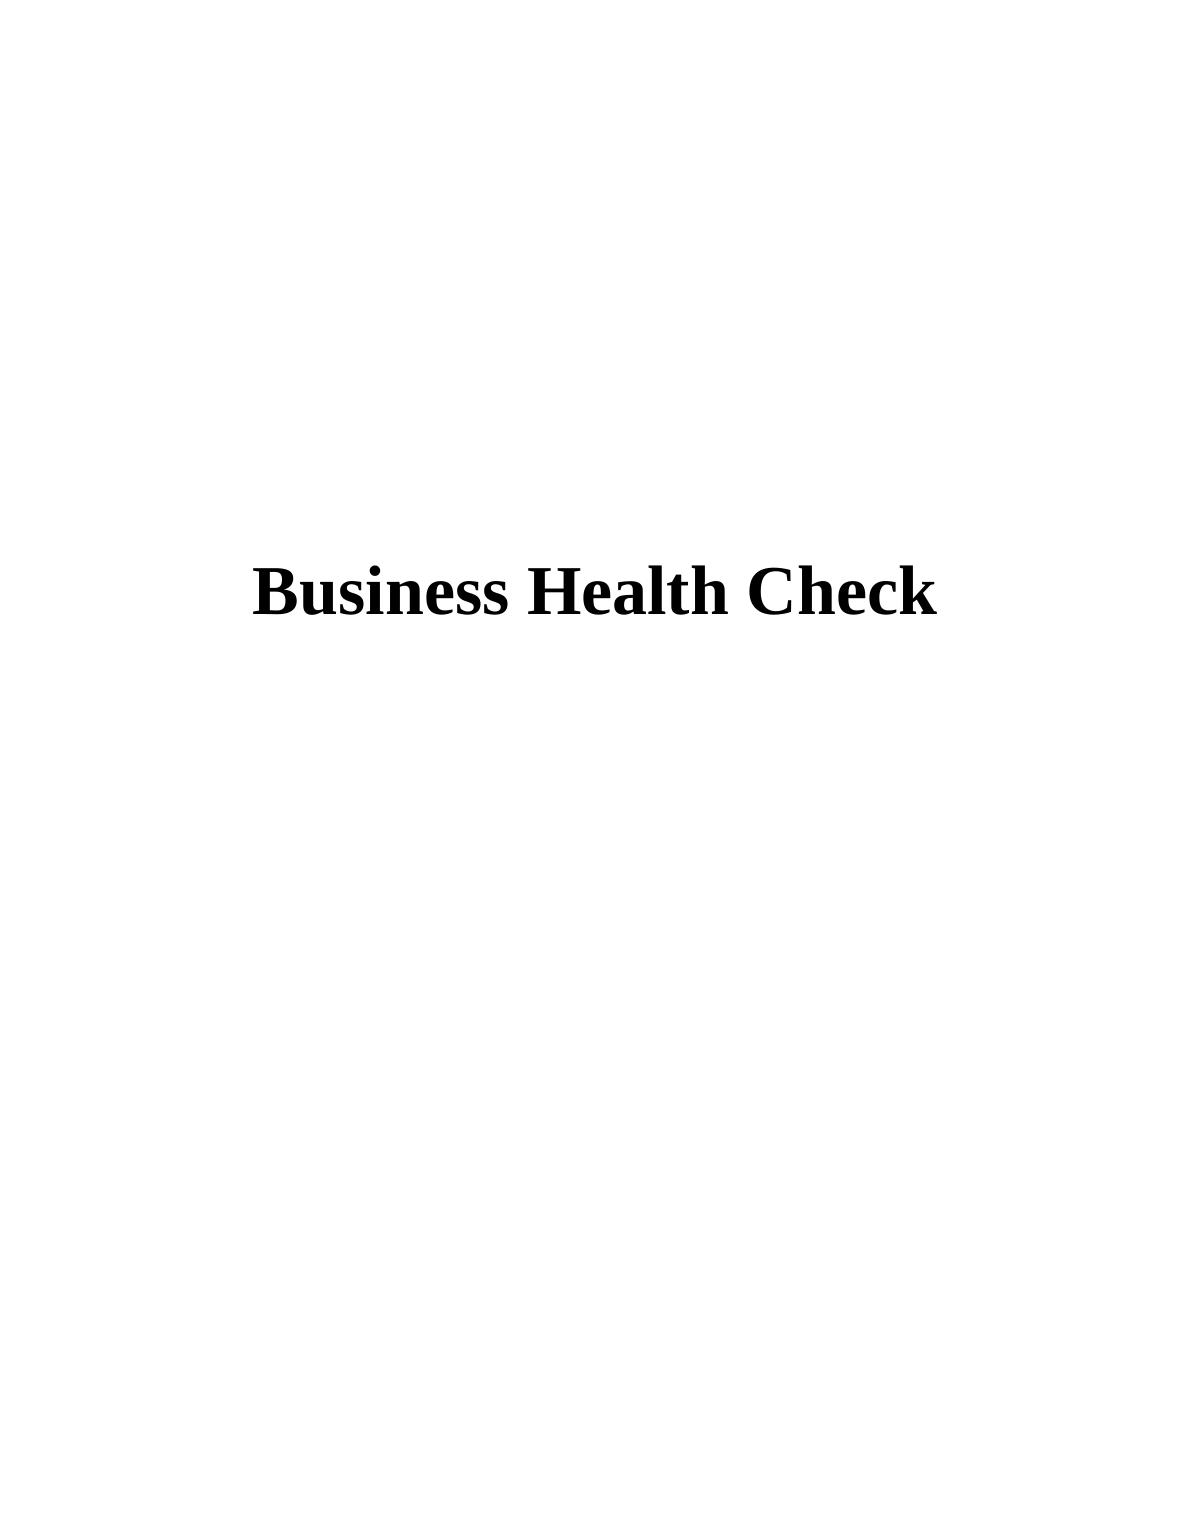 Business Health Check - Assignment_1